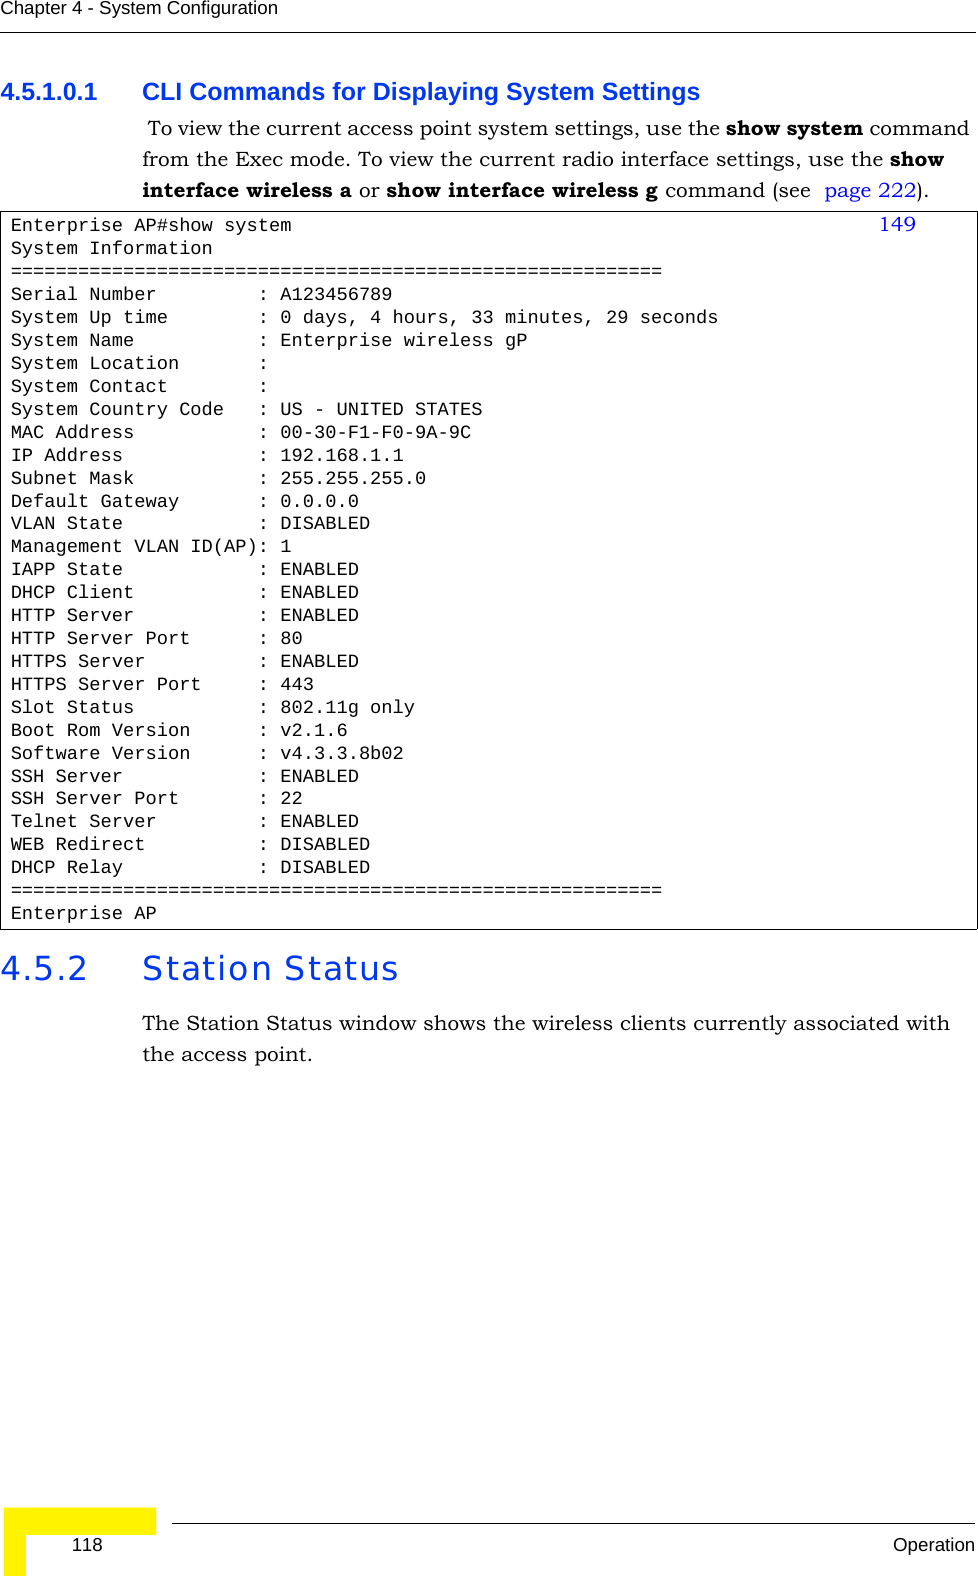  118 OperationChapter 4 - System Configuration4.5.1.0.1 CLI Commands for Displaying System Settings To view the current access point system settings, use the show system command from the Exec mode. To view the current radio interface settings, use the show interface wireless a or show interface wireless g command (see  page 222).4.5.2 Station StatusThe Station Status window shows the wireless clients currently associated with the access point.Enterprise AP#show system 149System Information==========================================================Serial Number         : A123456789System Up time        : 0 days, 4 hours, 33 minutes, 29 secondsSystem Name           : Enterprise wireless gPSystem Location       :System Contact        :System Country Code   : US - UNITED STATESMAC Address           : 00-30-F1-F0-9A-9CIP Address            : 192.168.1.1Subnet Mask           : 255.255.255.0Default Gateway       : 0.0.0.0VLAN State            : DISABLEDManagement VLAN ID(AP): 1IAPP State            : ENABLEDDHCP Client           : ENABLEDHTTP Server           : ENABLEDHTTP Server Port      : 80HTTPS Server          : ENABLEDHTTPS Server Port     : 443Slot Status           : 802.11g onlyBoot Rom Version      : v2.1.6Software Version      : v4.3.3.8b02SSH Server            : ENABLEDSSH Server Port       : 22Telnet Server         : ENABLEDWEB Redirect          : DISABLEDDHCP Relay            : DISABLED==========================================================Enterprise AP